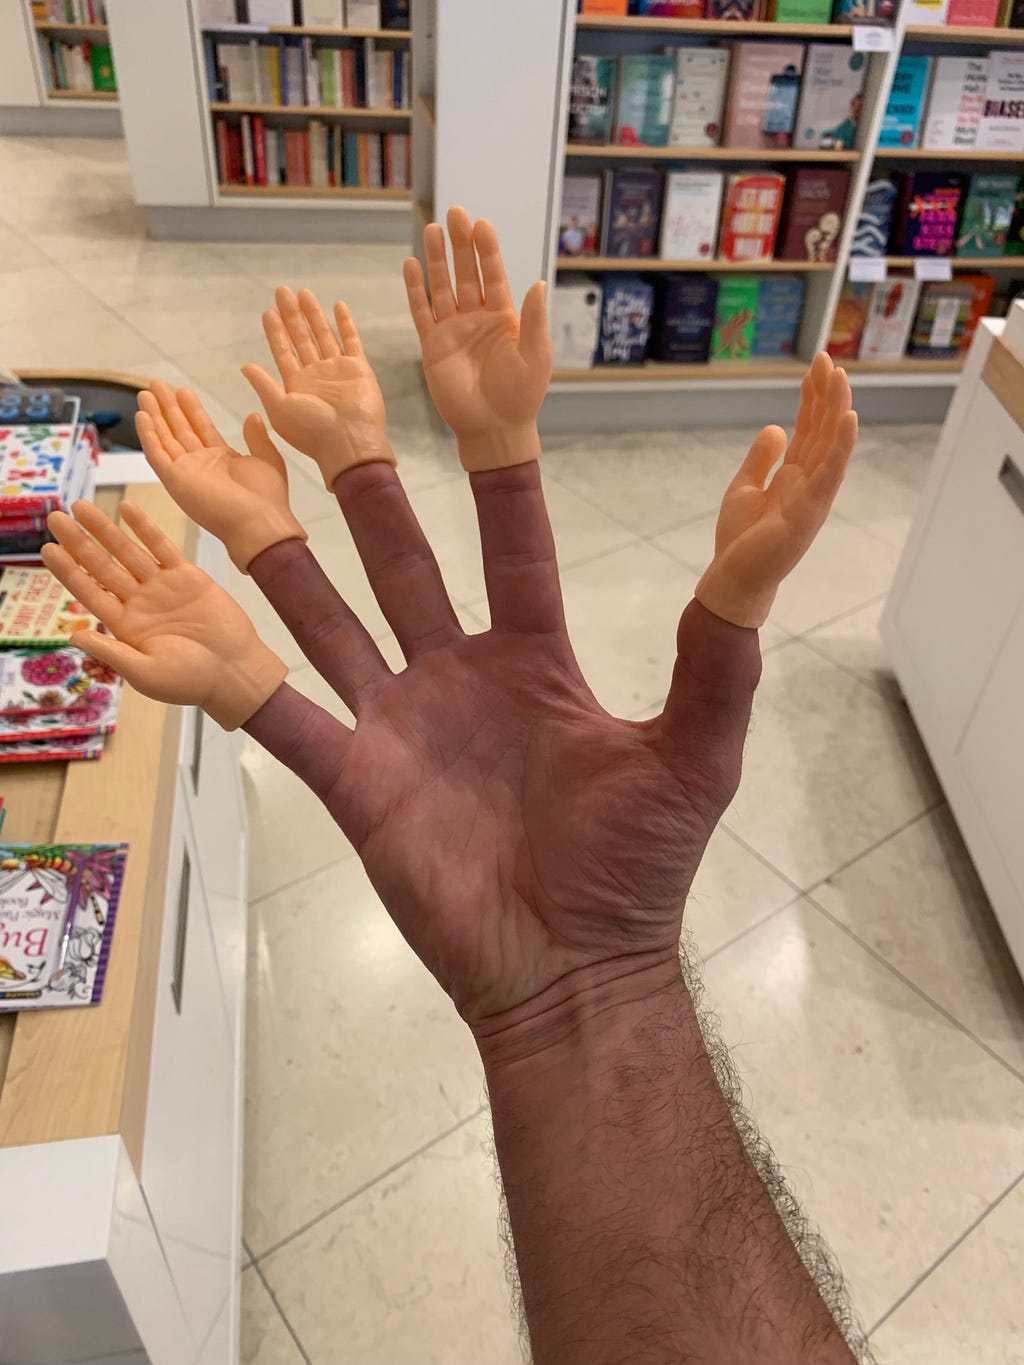 The authors hand. The tip of each finger has a small rubber hand on.